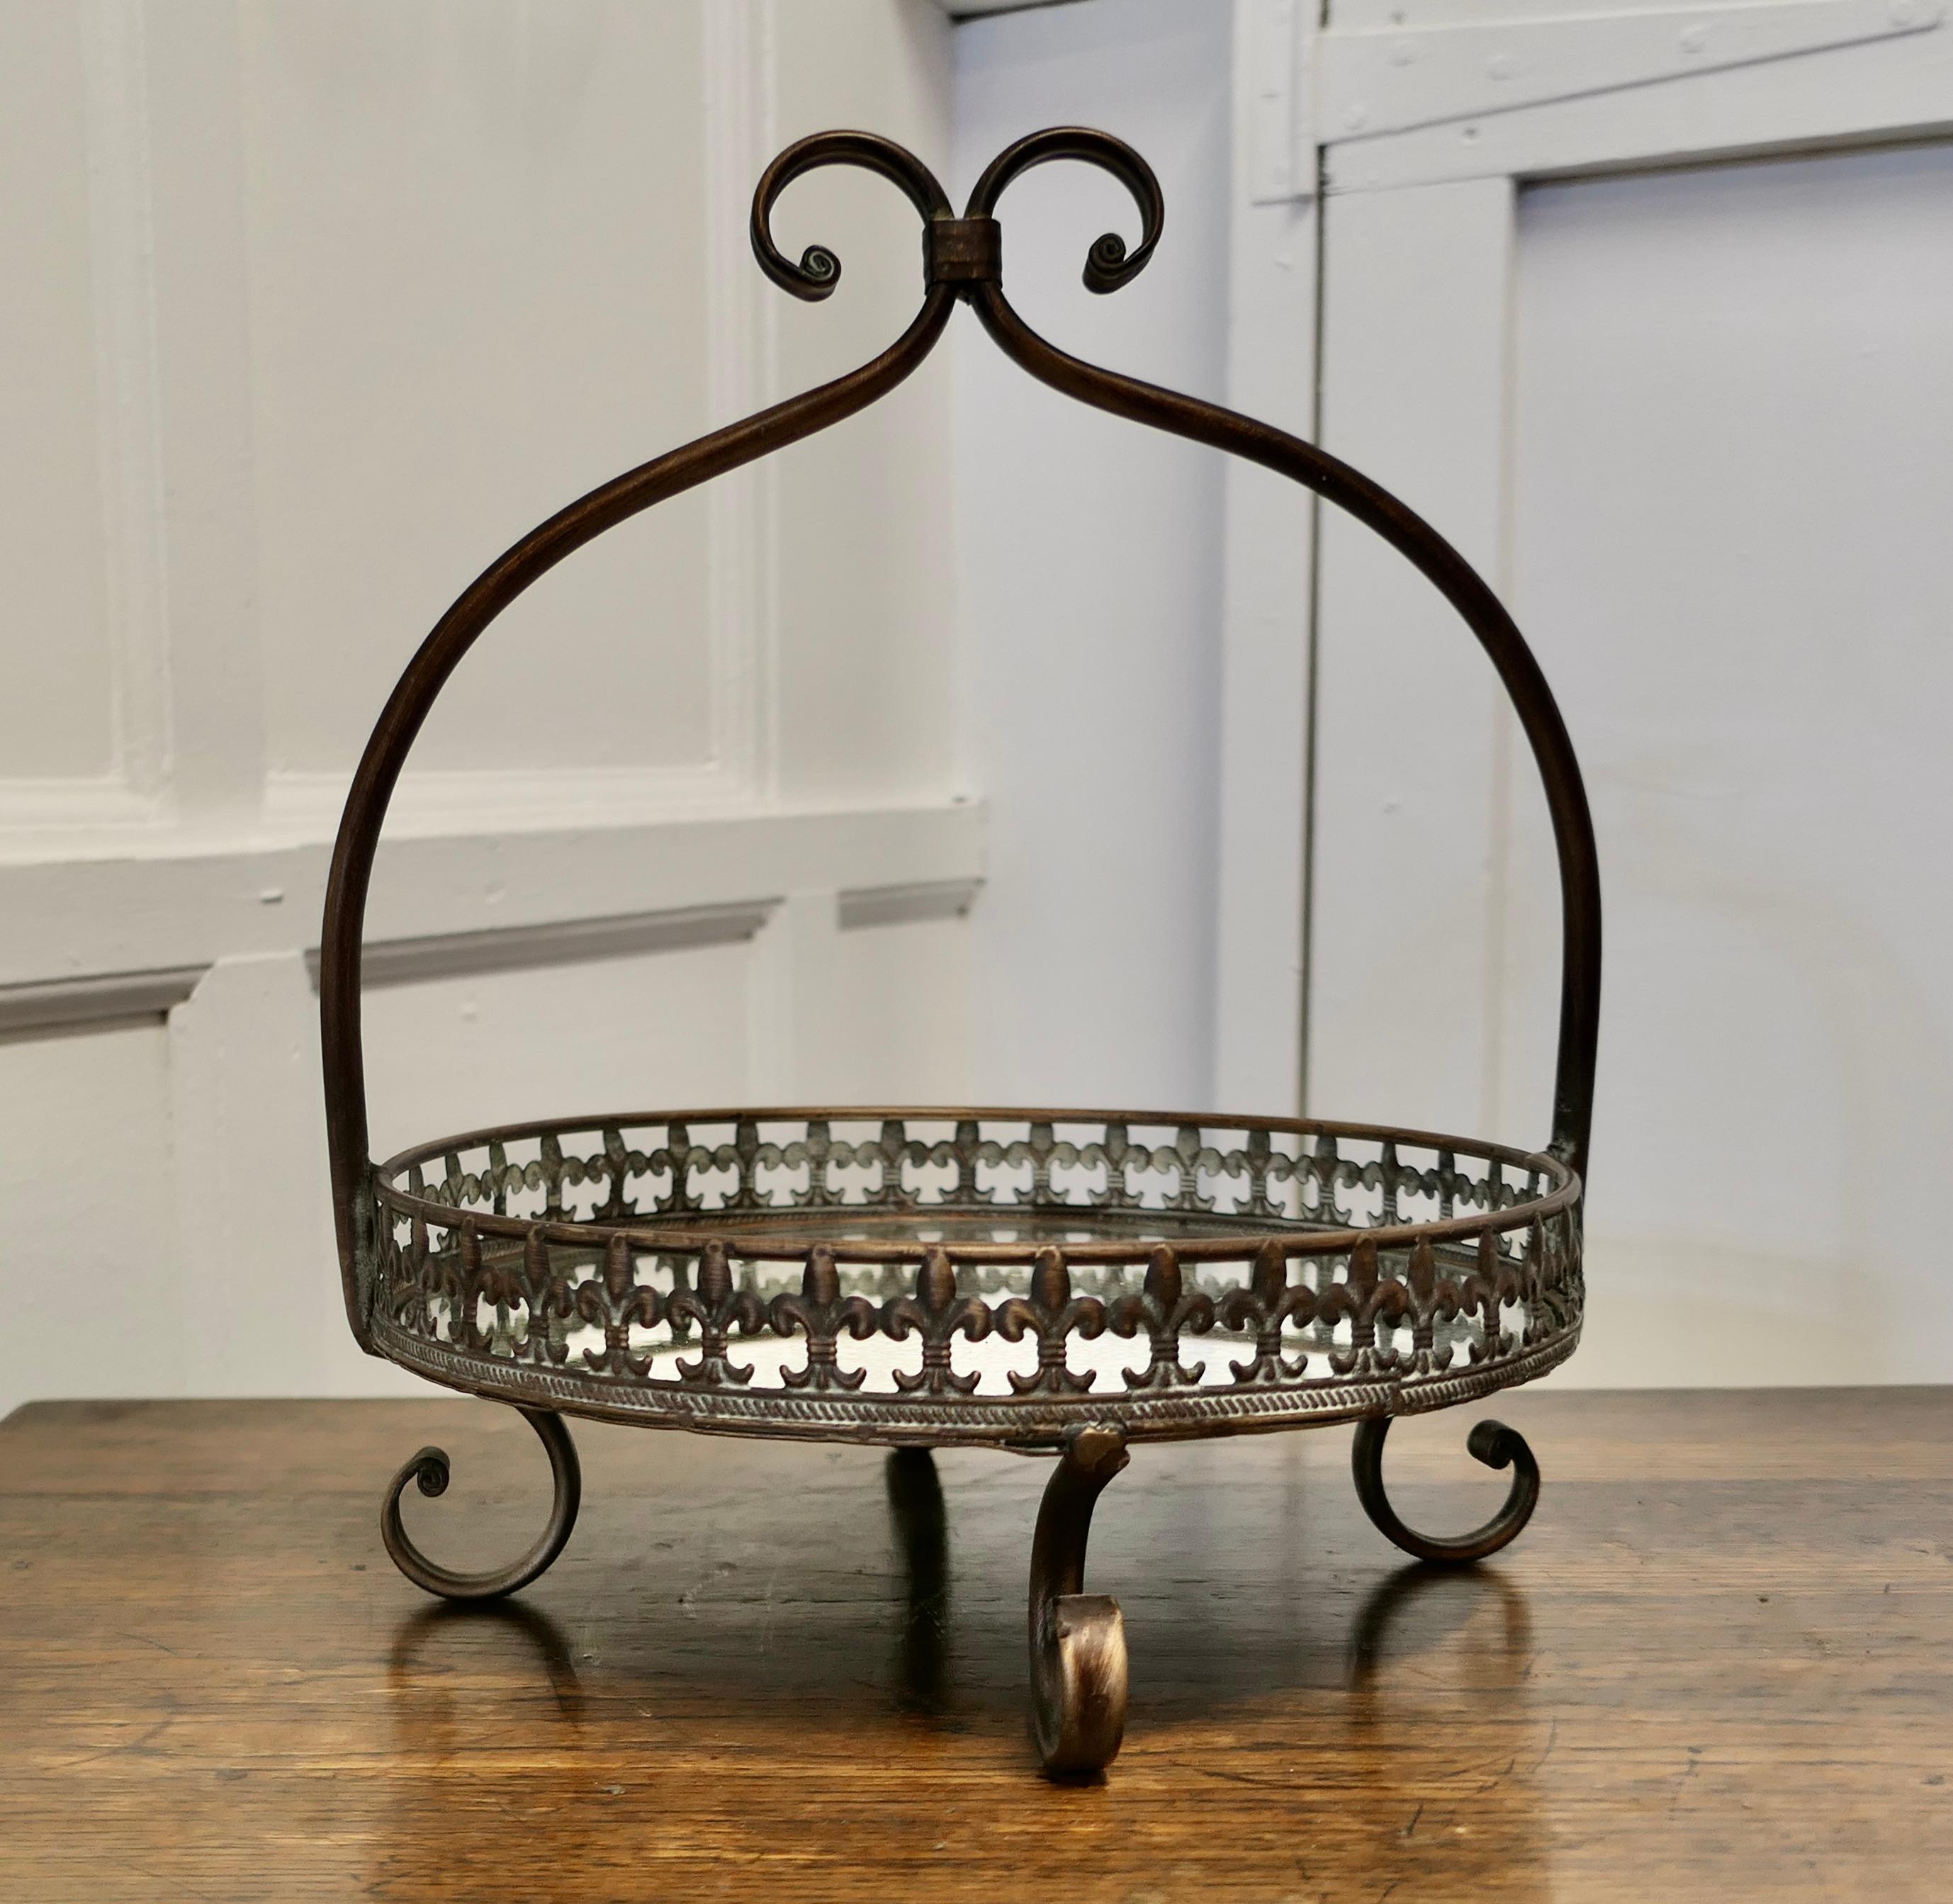 French Copper and Mirrored Bottomed Cake Stand

A pretty Cake stand with an arched handle, the stand sits on 4 curled feet which match the twist of the handle
The bottom of the stand is made of aged mirror and has a fleur des lys gallery around
The